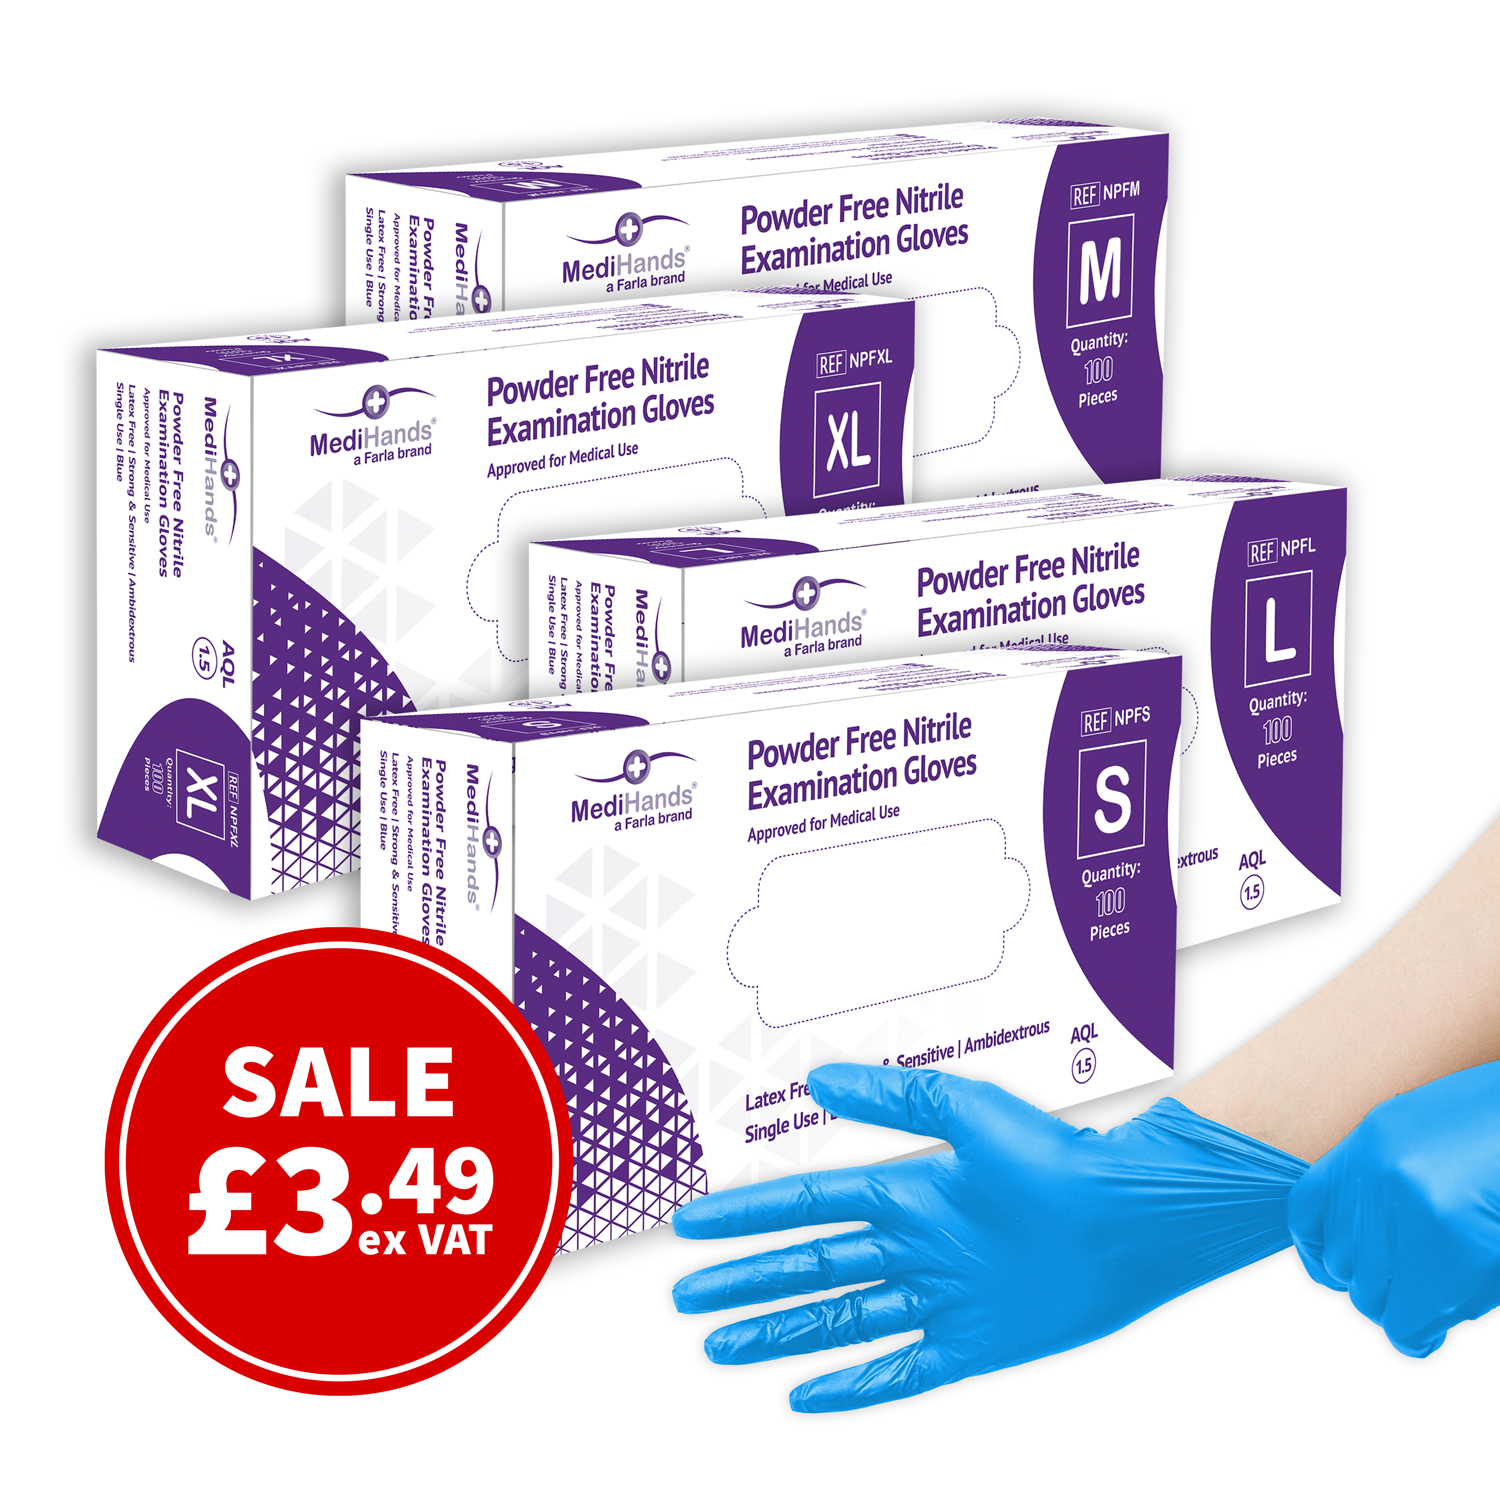 MediHands Examination Nitrile Powder Free Gloves | Blue | Pack of 100 Pieces